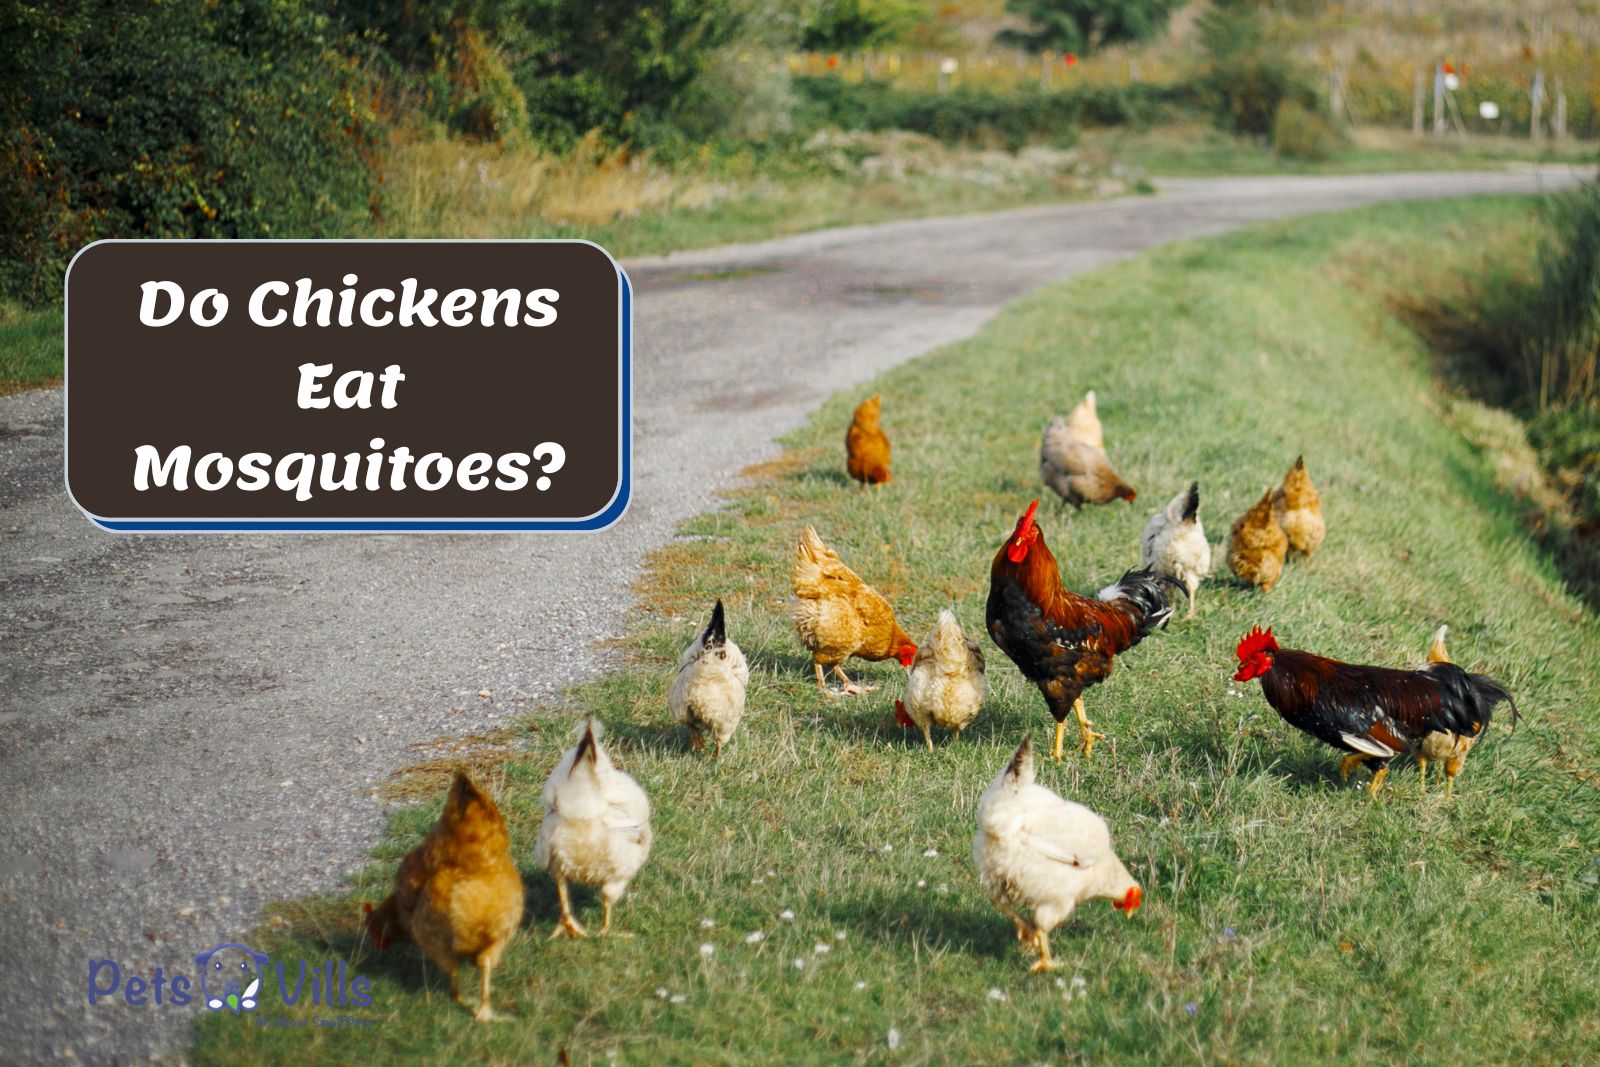 chickens pecking on the grasses but Do Chickens Eat Mosquitoes